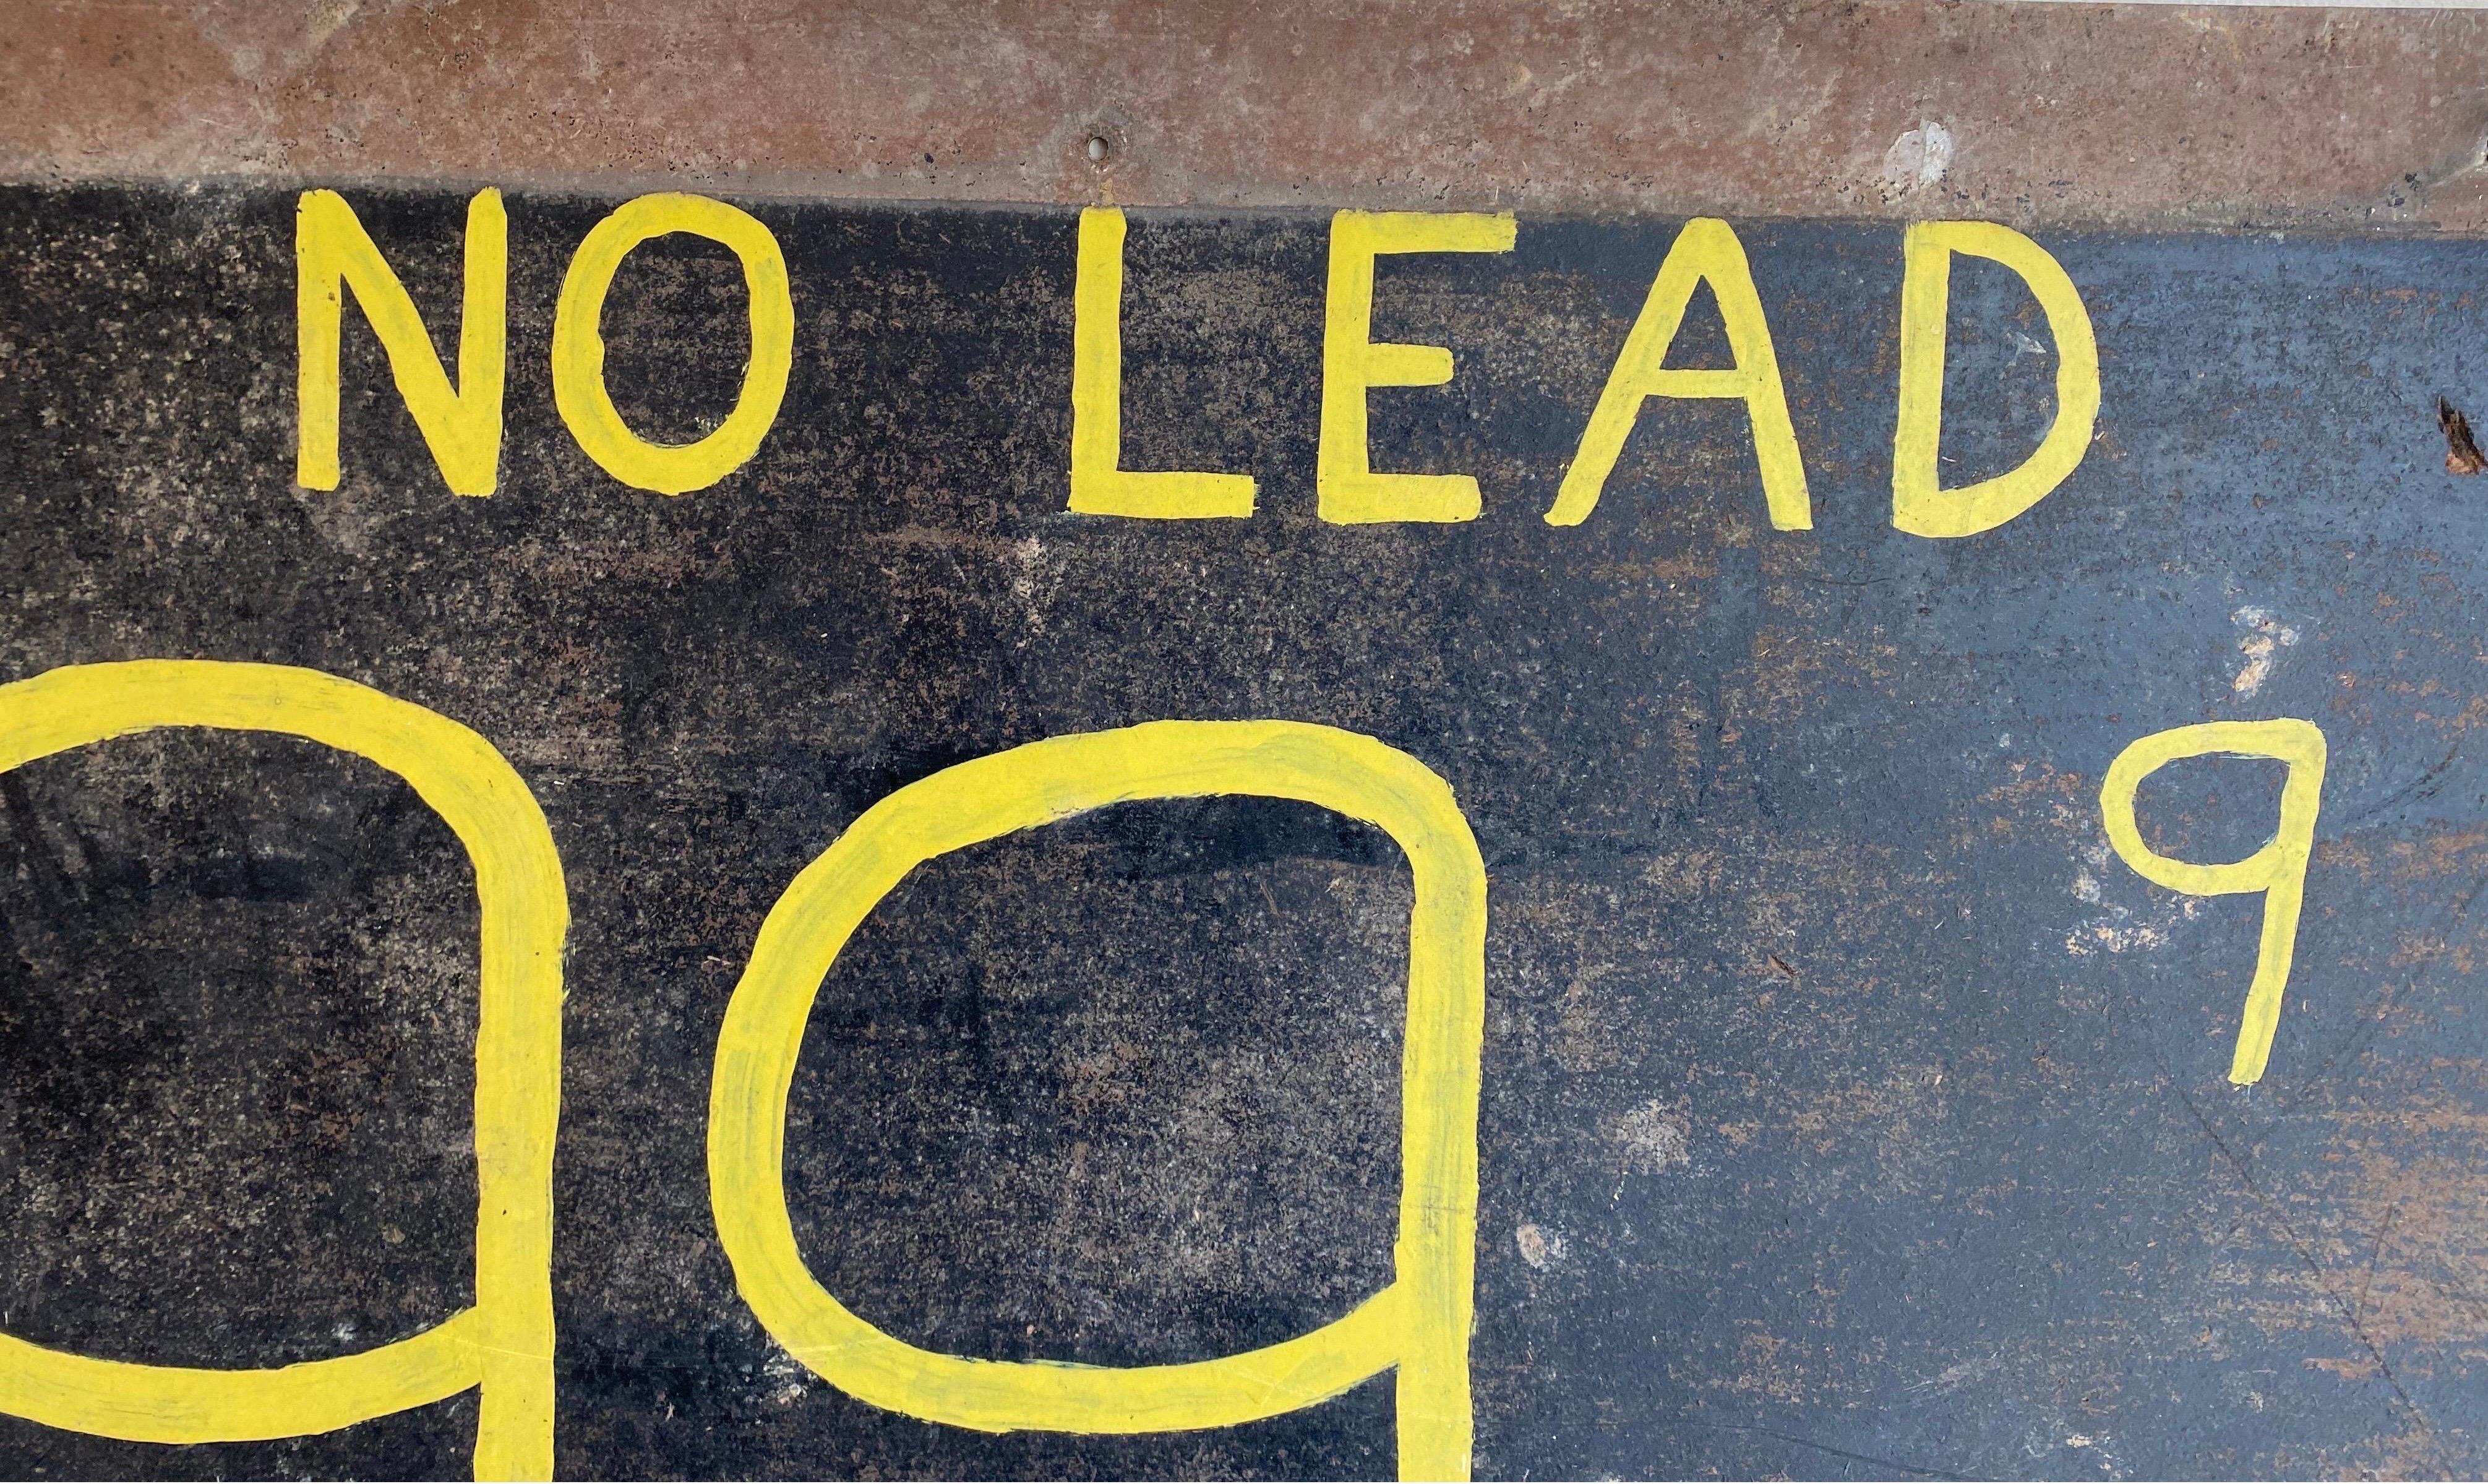 Vintage handcrafted gas station signage on board. The sign dates to pre 1975 when leaded gasoline was phased out. The state states “No Lead 99.9”, painted in yellow paint on a black fiberboard.